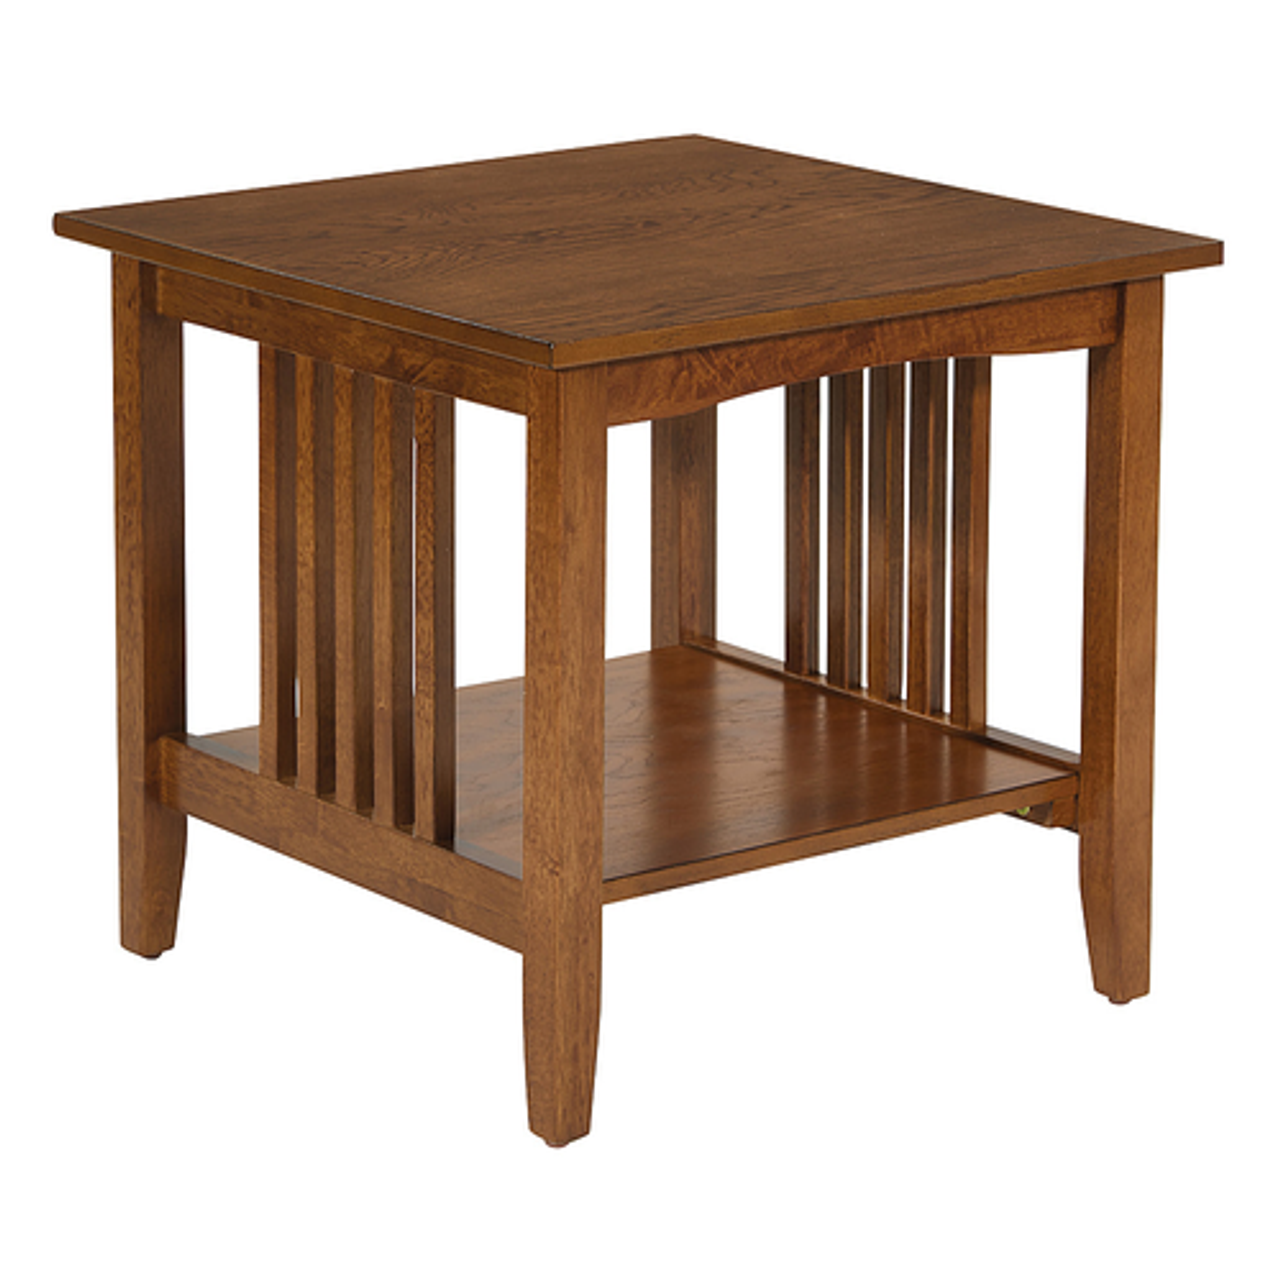 OSP Home Furnishings - Sierra Mission End Table - Ash Finish